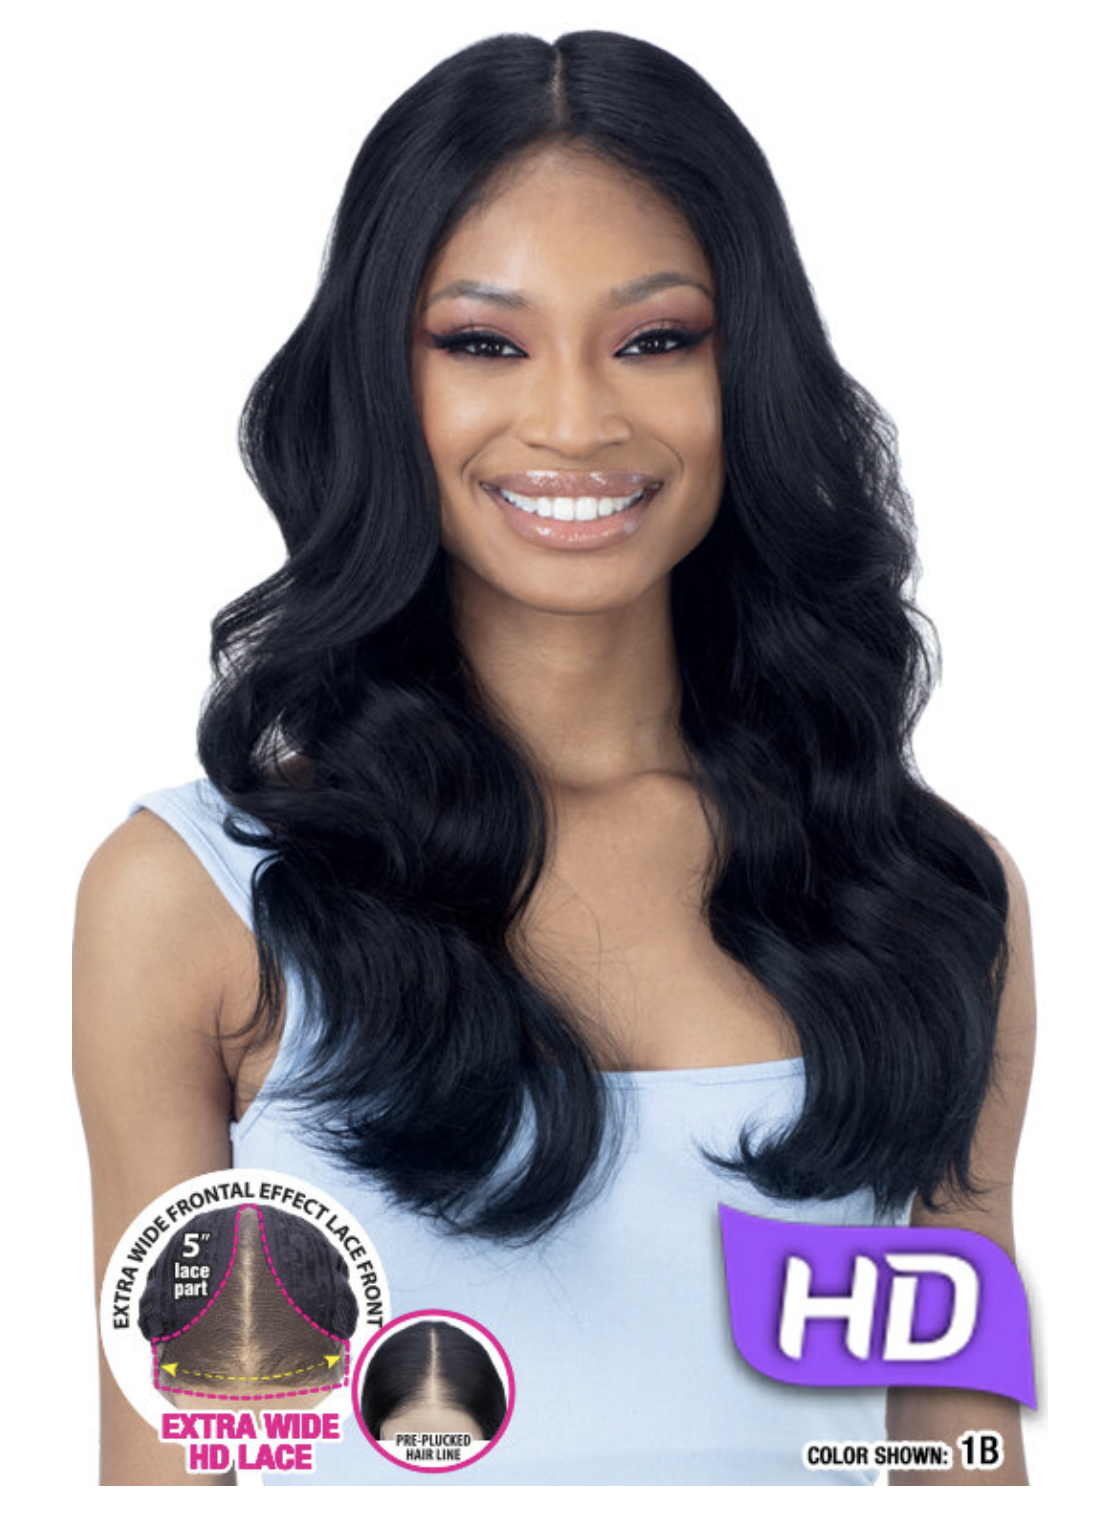 FreeTress Equal HI Def Frontal Effect Lace Front - Gracie - BPolished Beauty Supply